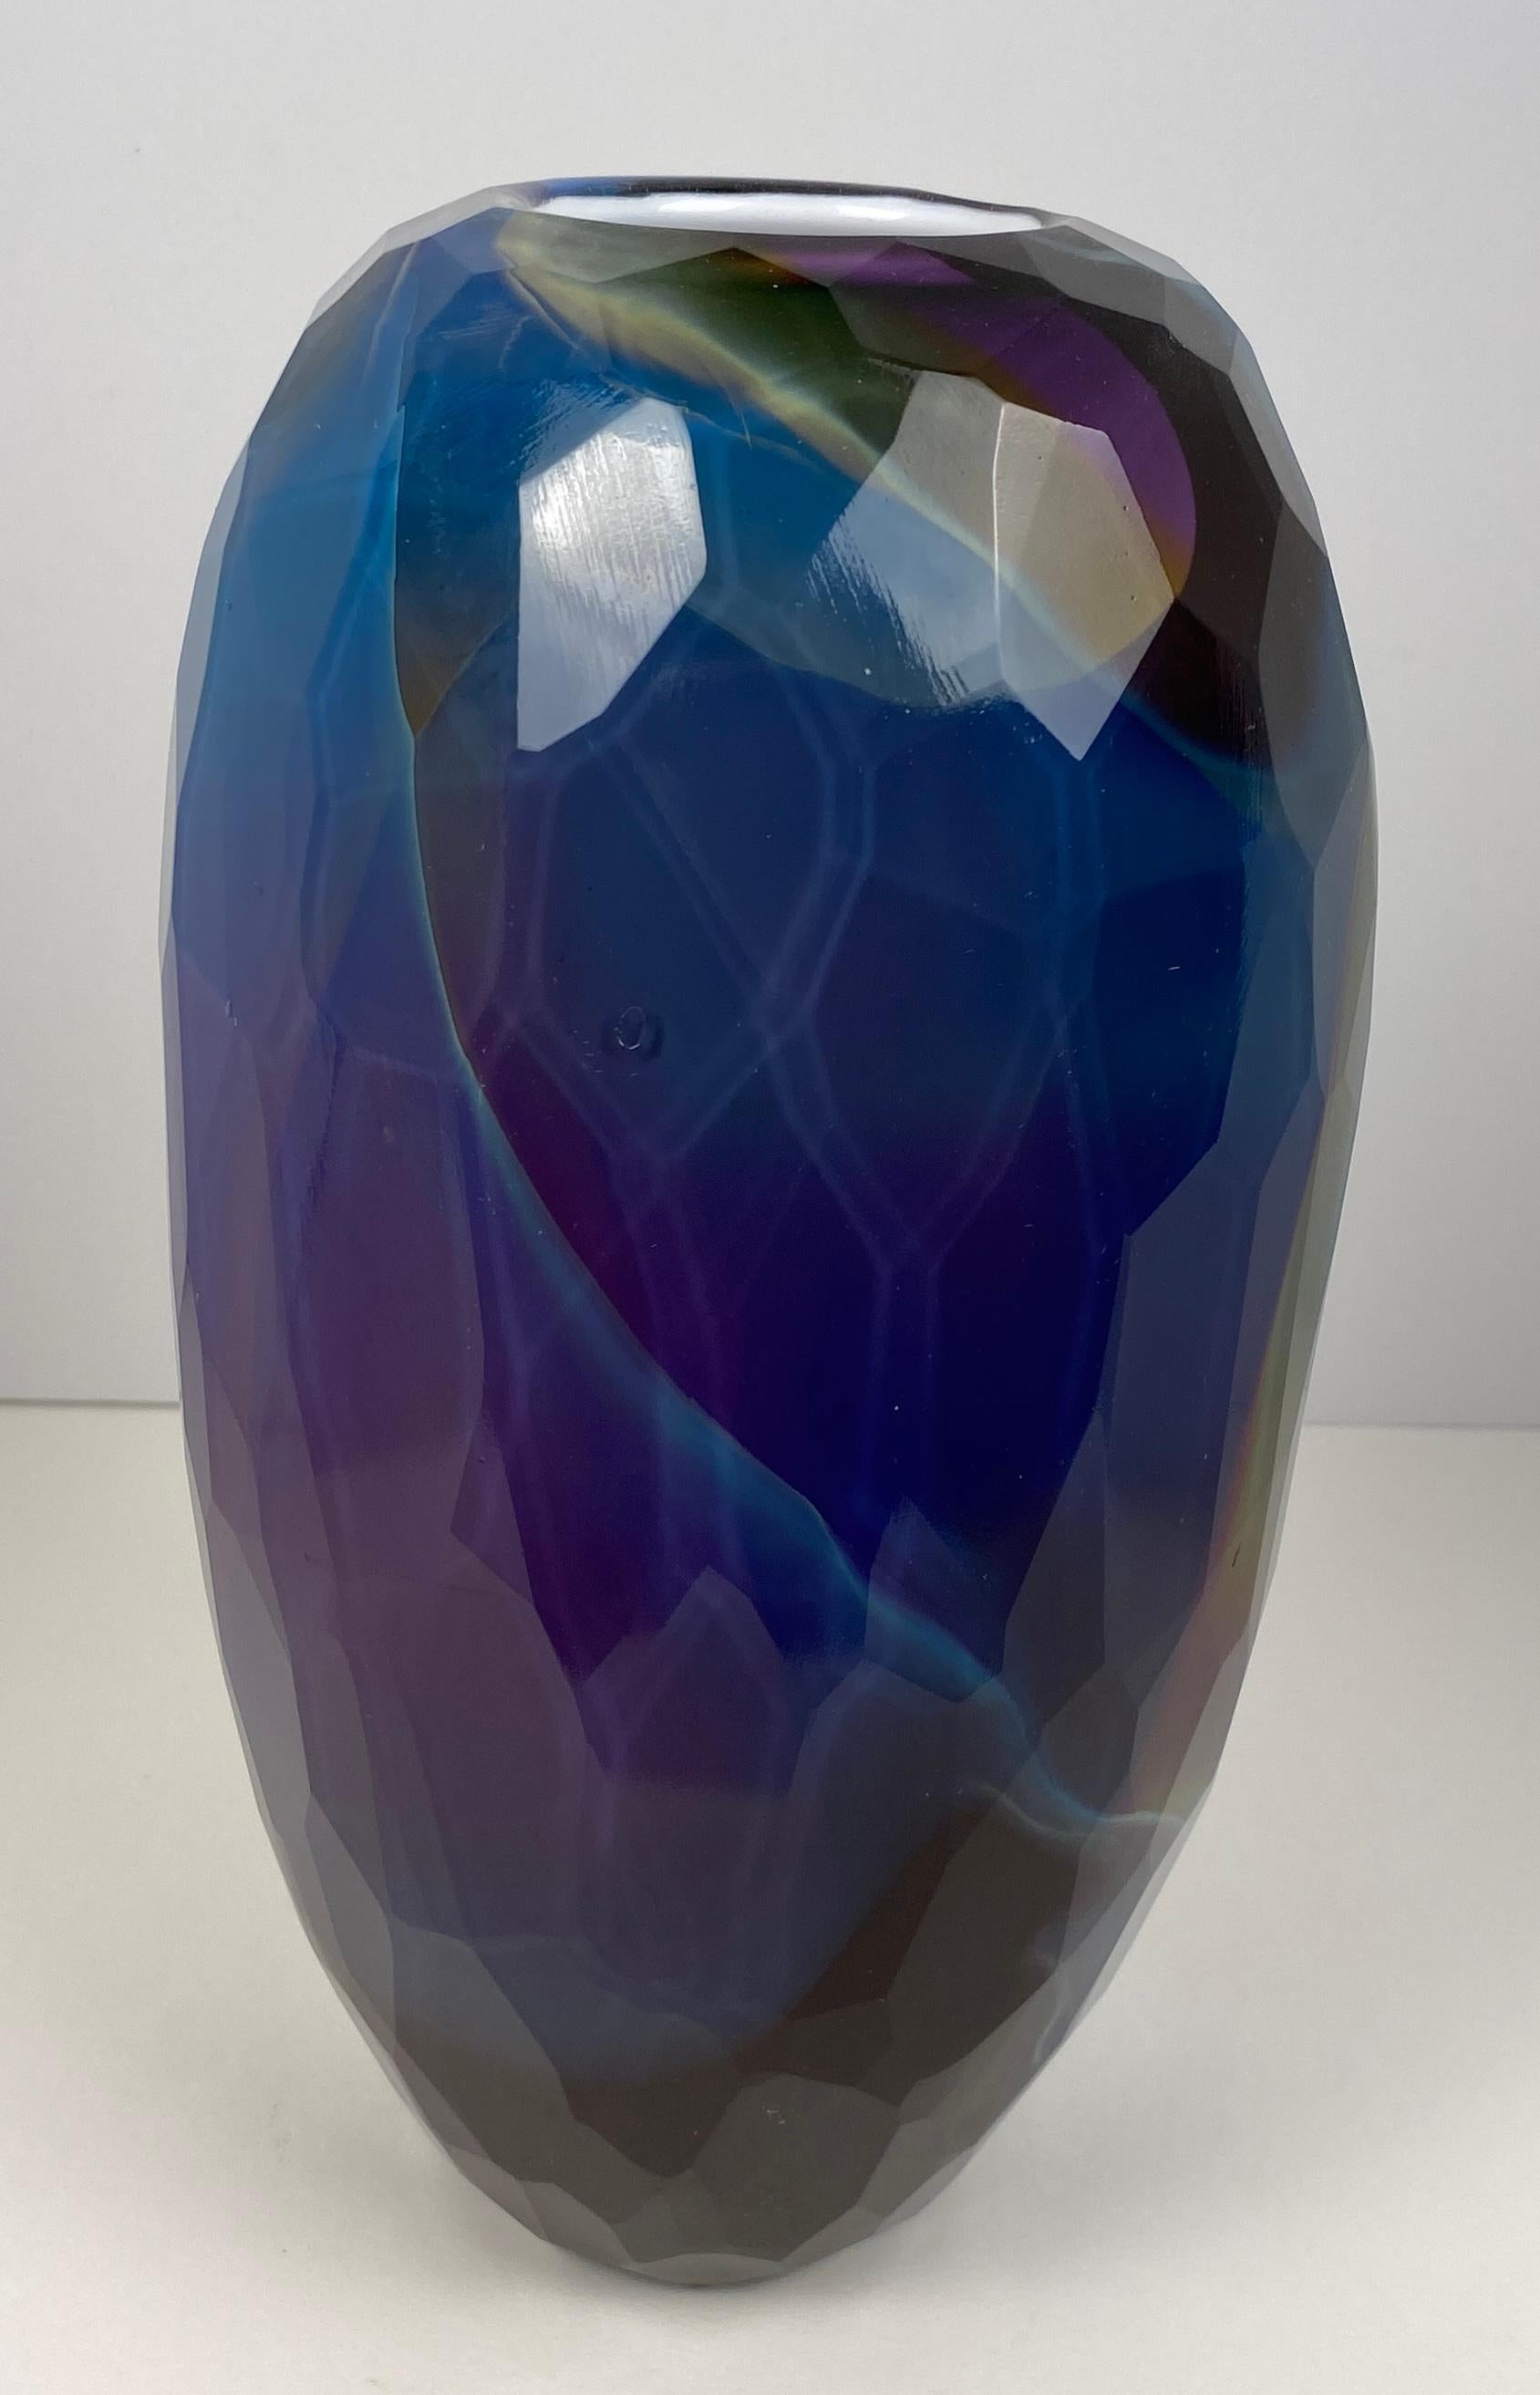 Introduce a burst of color and exquisite craftsmanship into your home with this hand-crafted art glass vase by Joseph Hobbs.  This unique piece showcases the artist's attention to detail, featuring a captivating design of irregular-shaped patterns